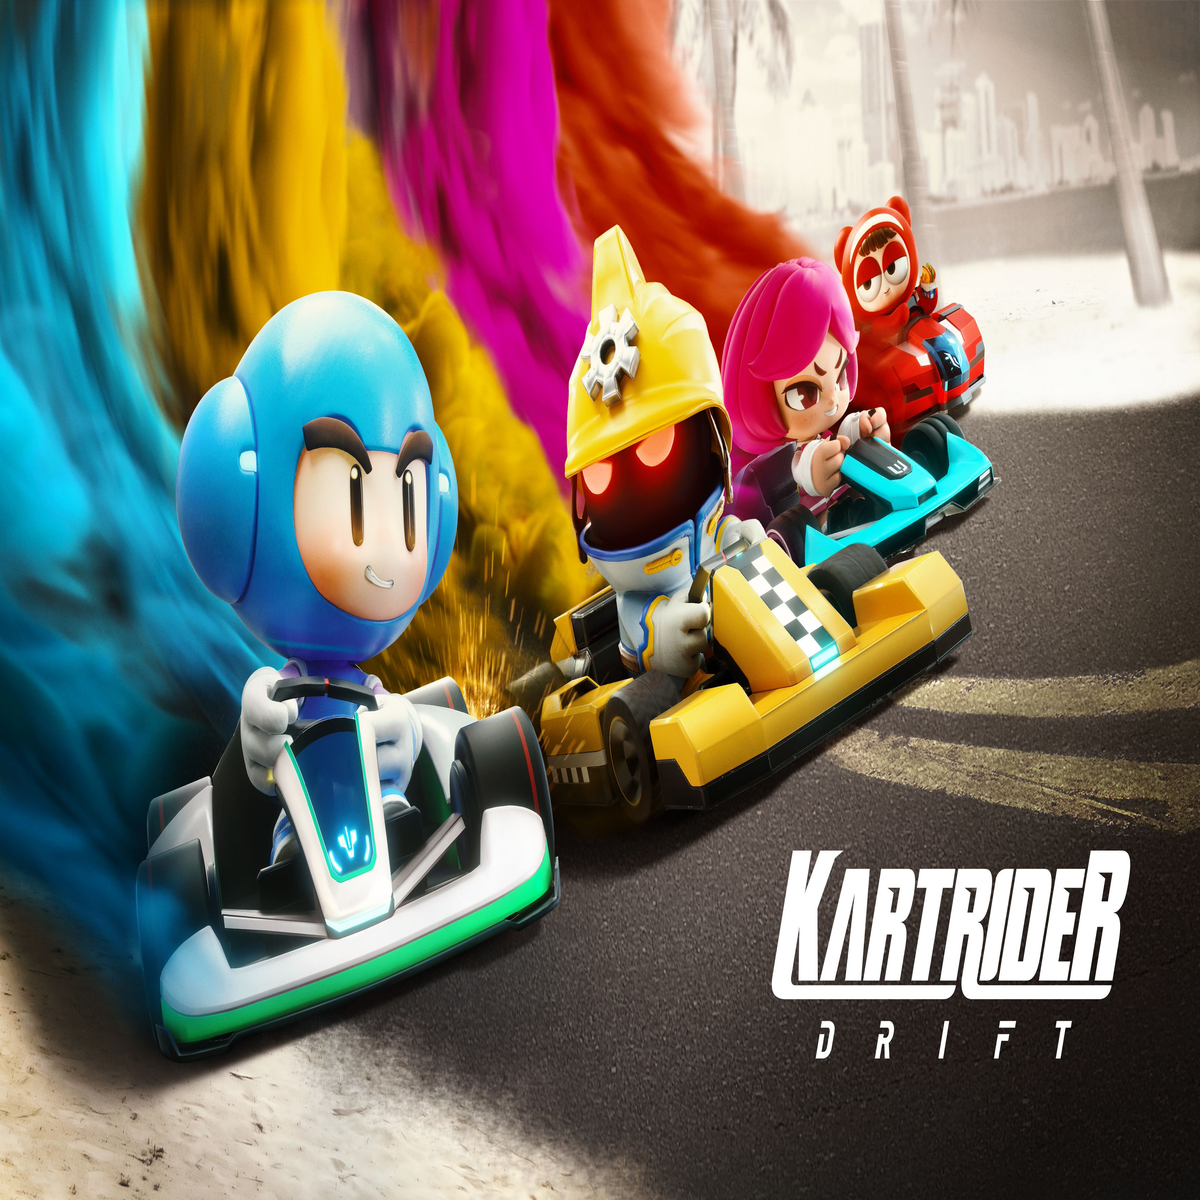 Drift – a free-to-play kart racer – lands on PS4 and PS5 in 2022 | VG247